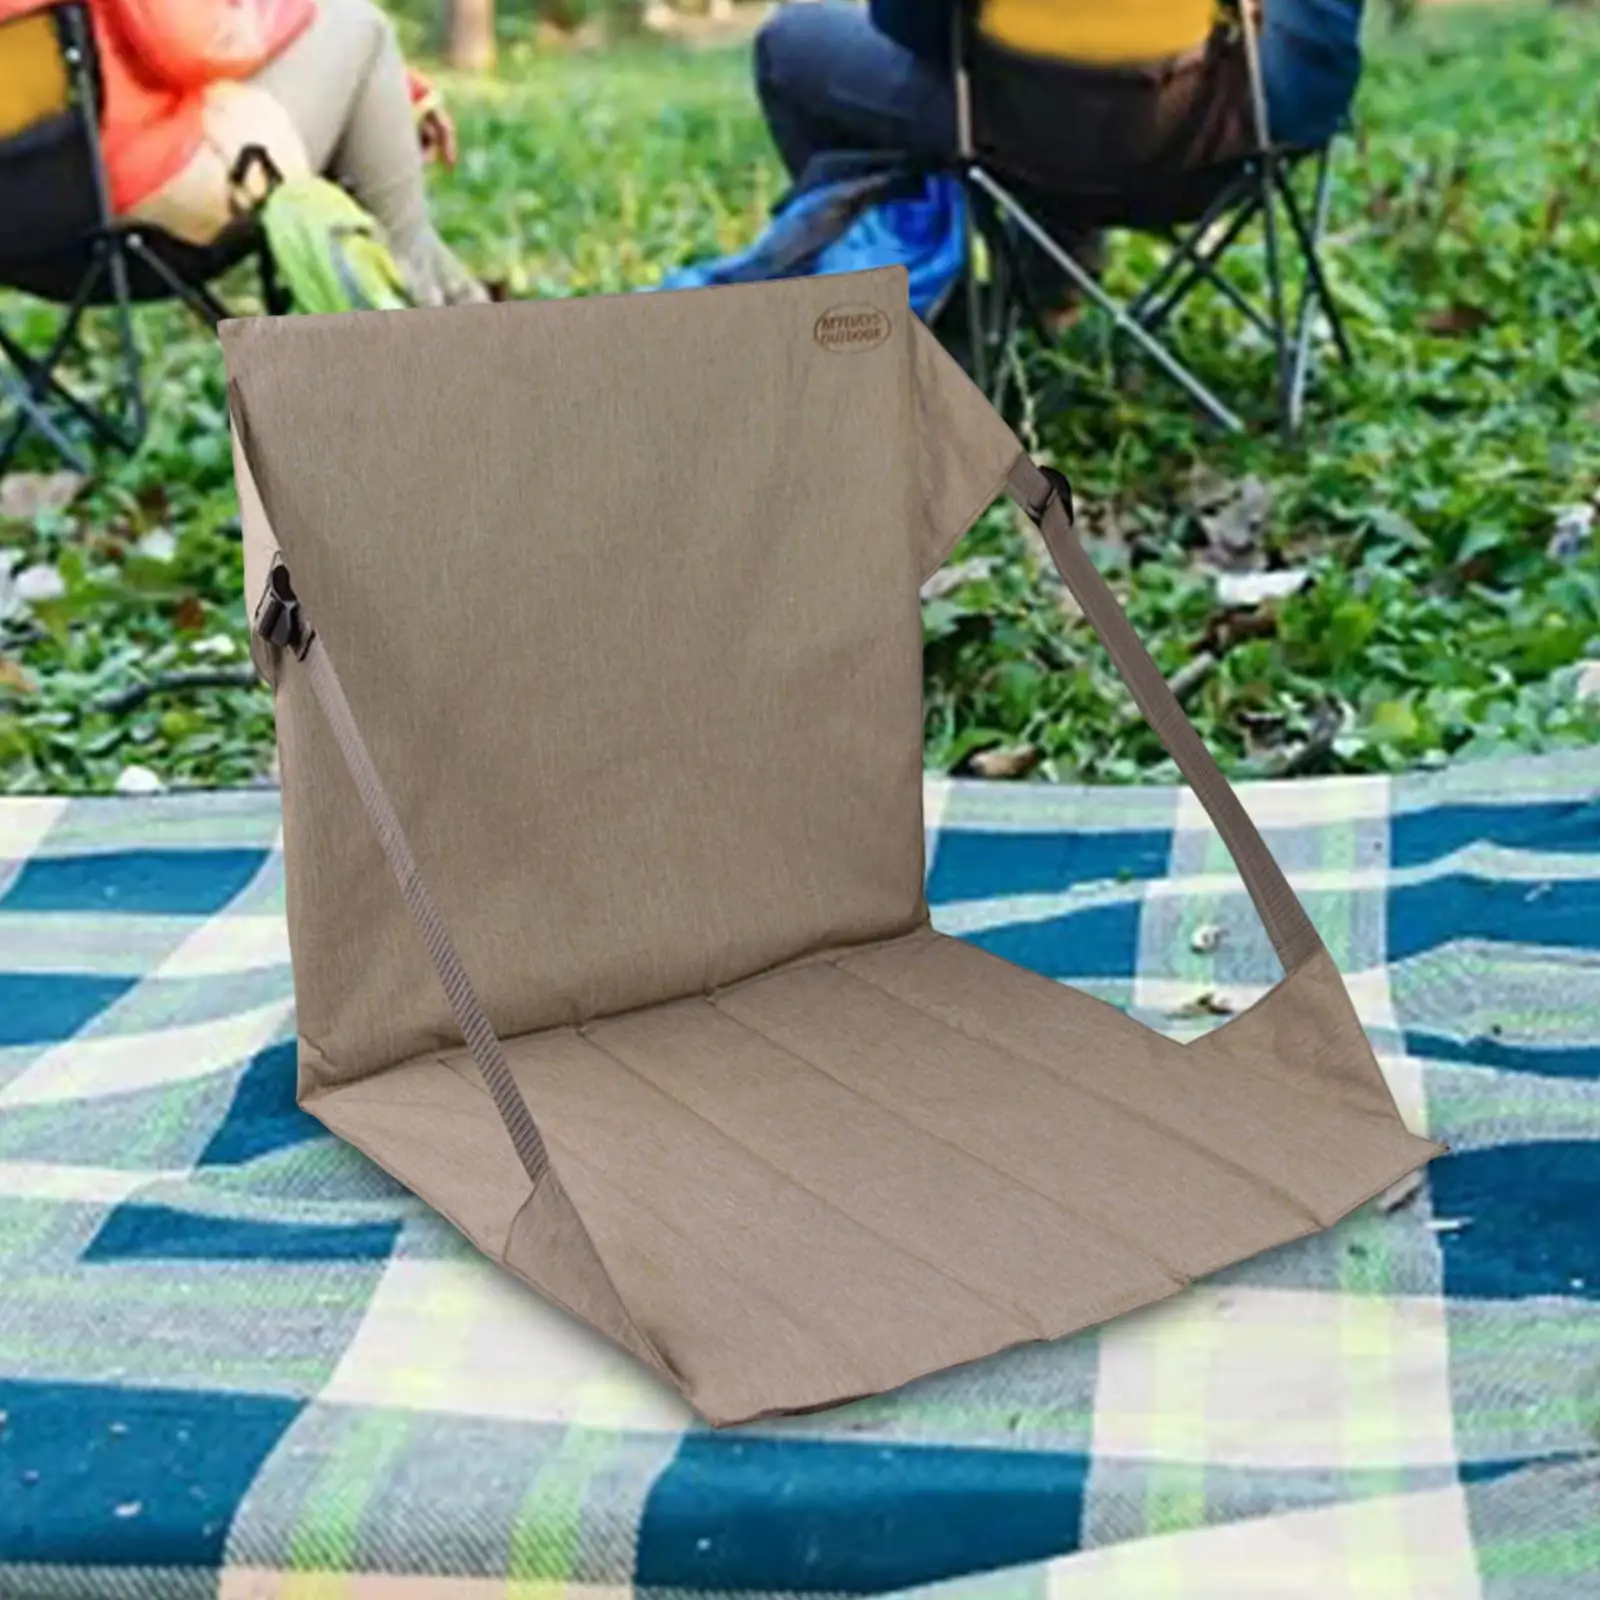 Rollable Portable Stadium Seat Cushion Folding Chair Cushion Multifunction for